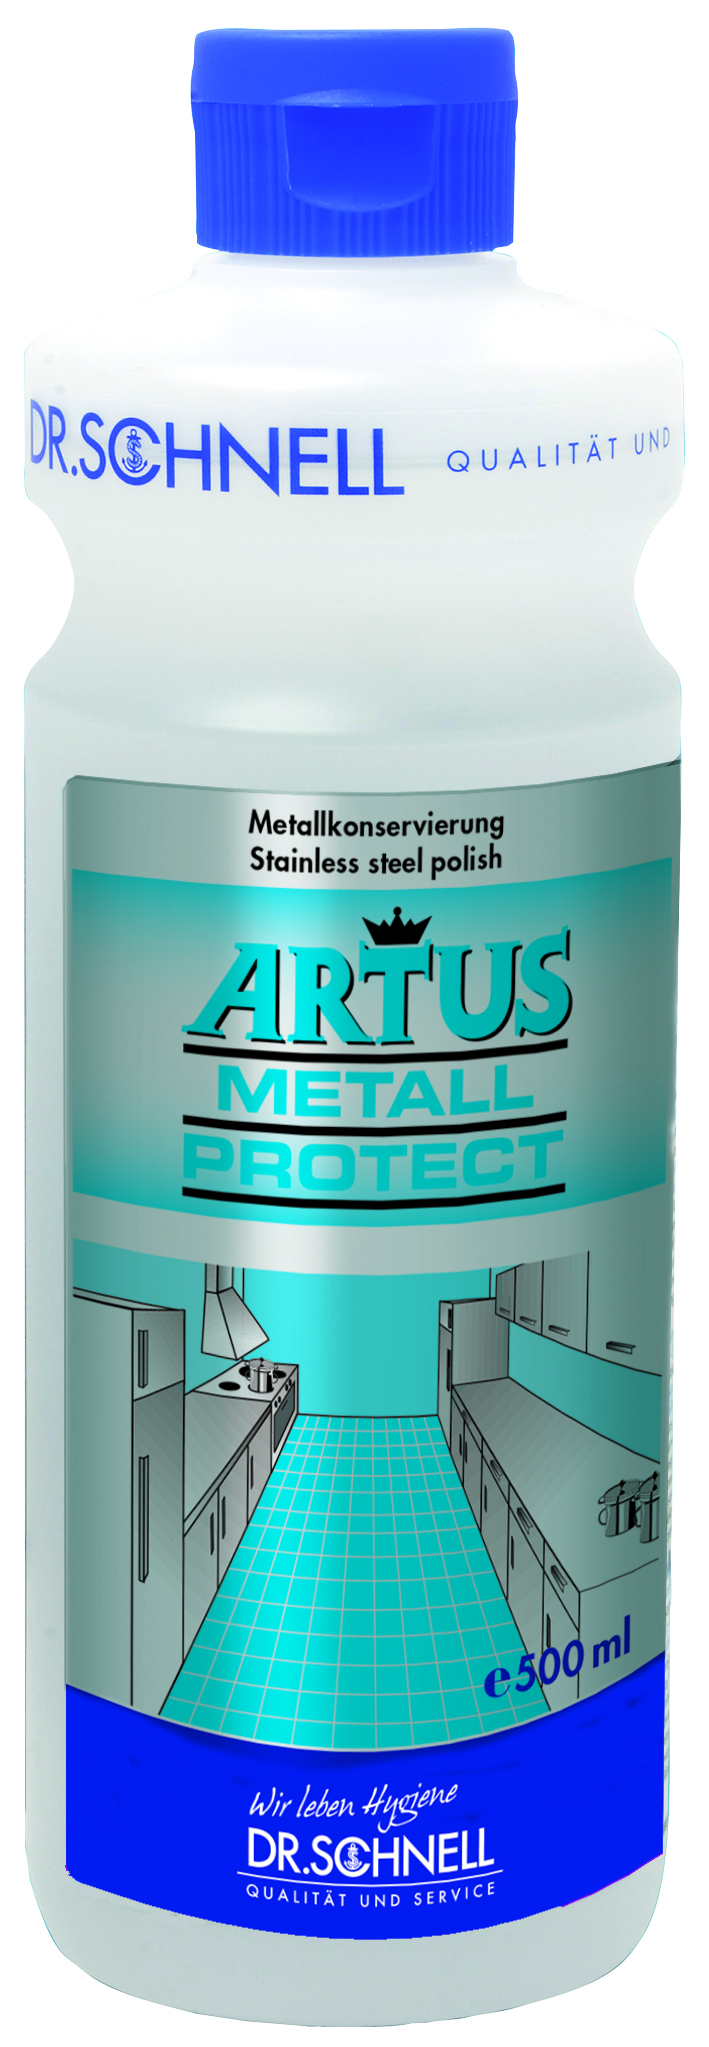 ARTUS Metall Protect 500 ml Edelstahl-pflege, Dr. Schnell